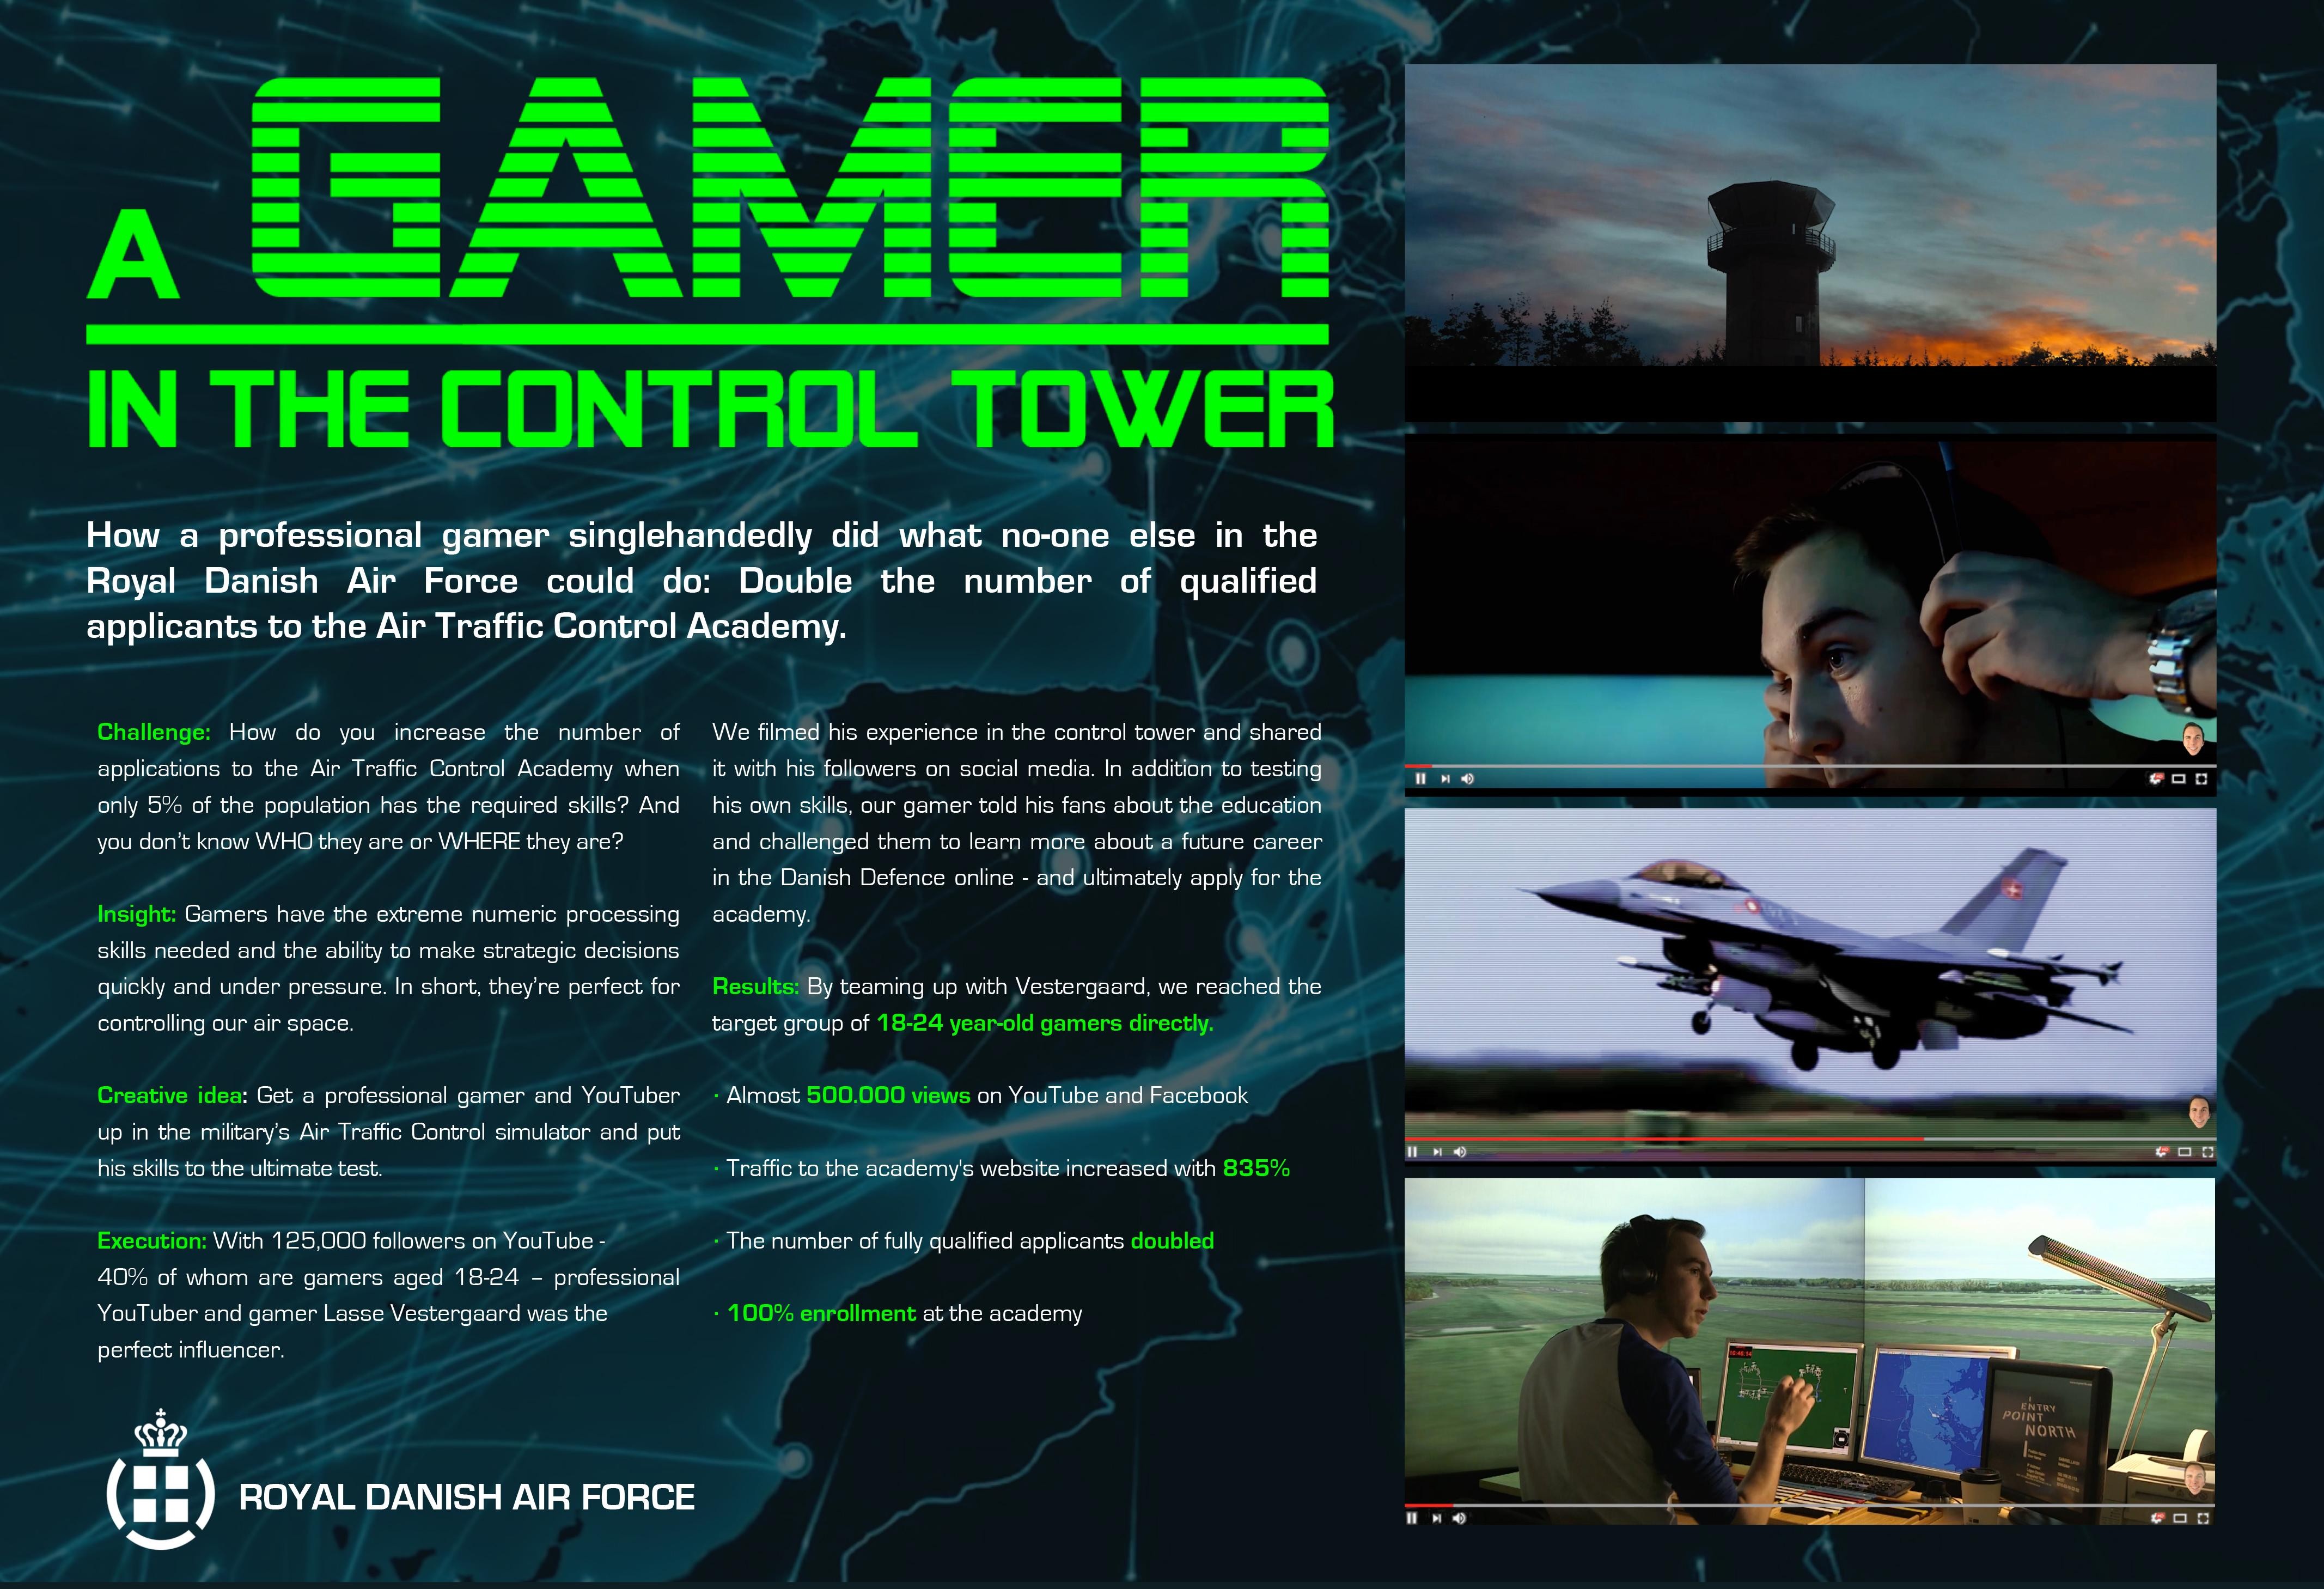 A GAMER IN THE CONTROL TOWER